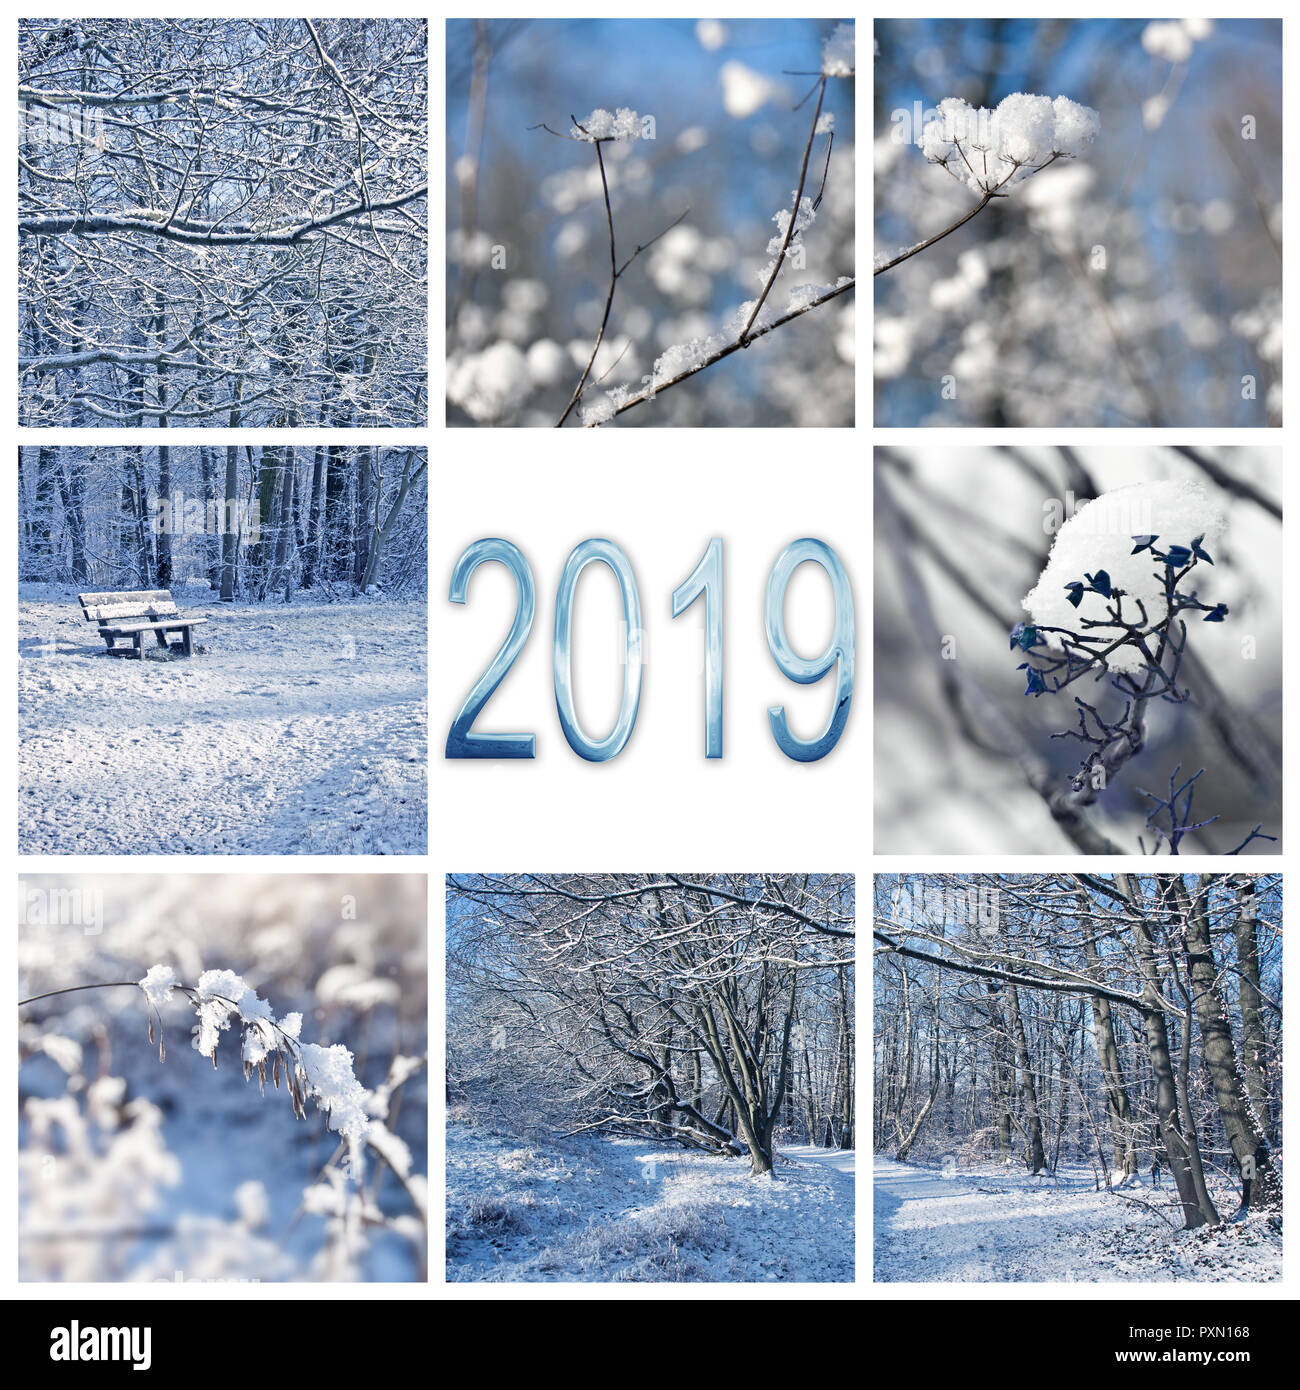 2019, snow and winter landscapes square greeting card Stock Photo